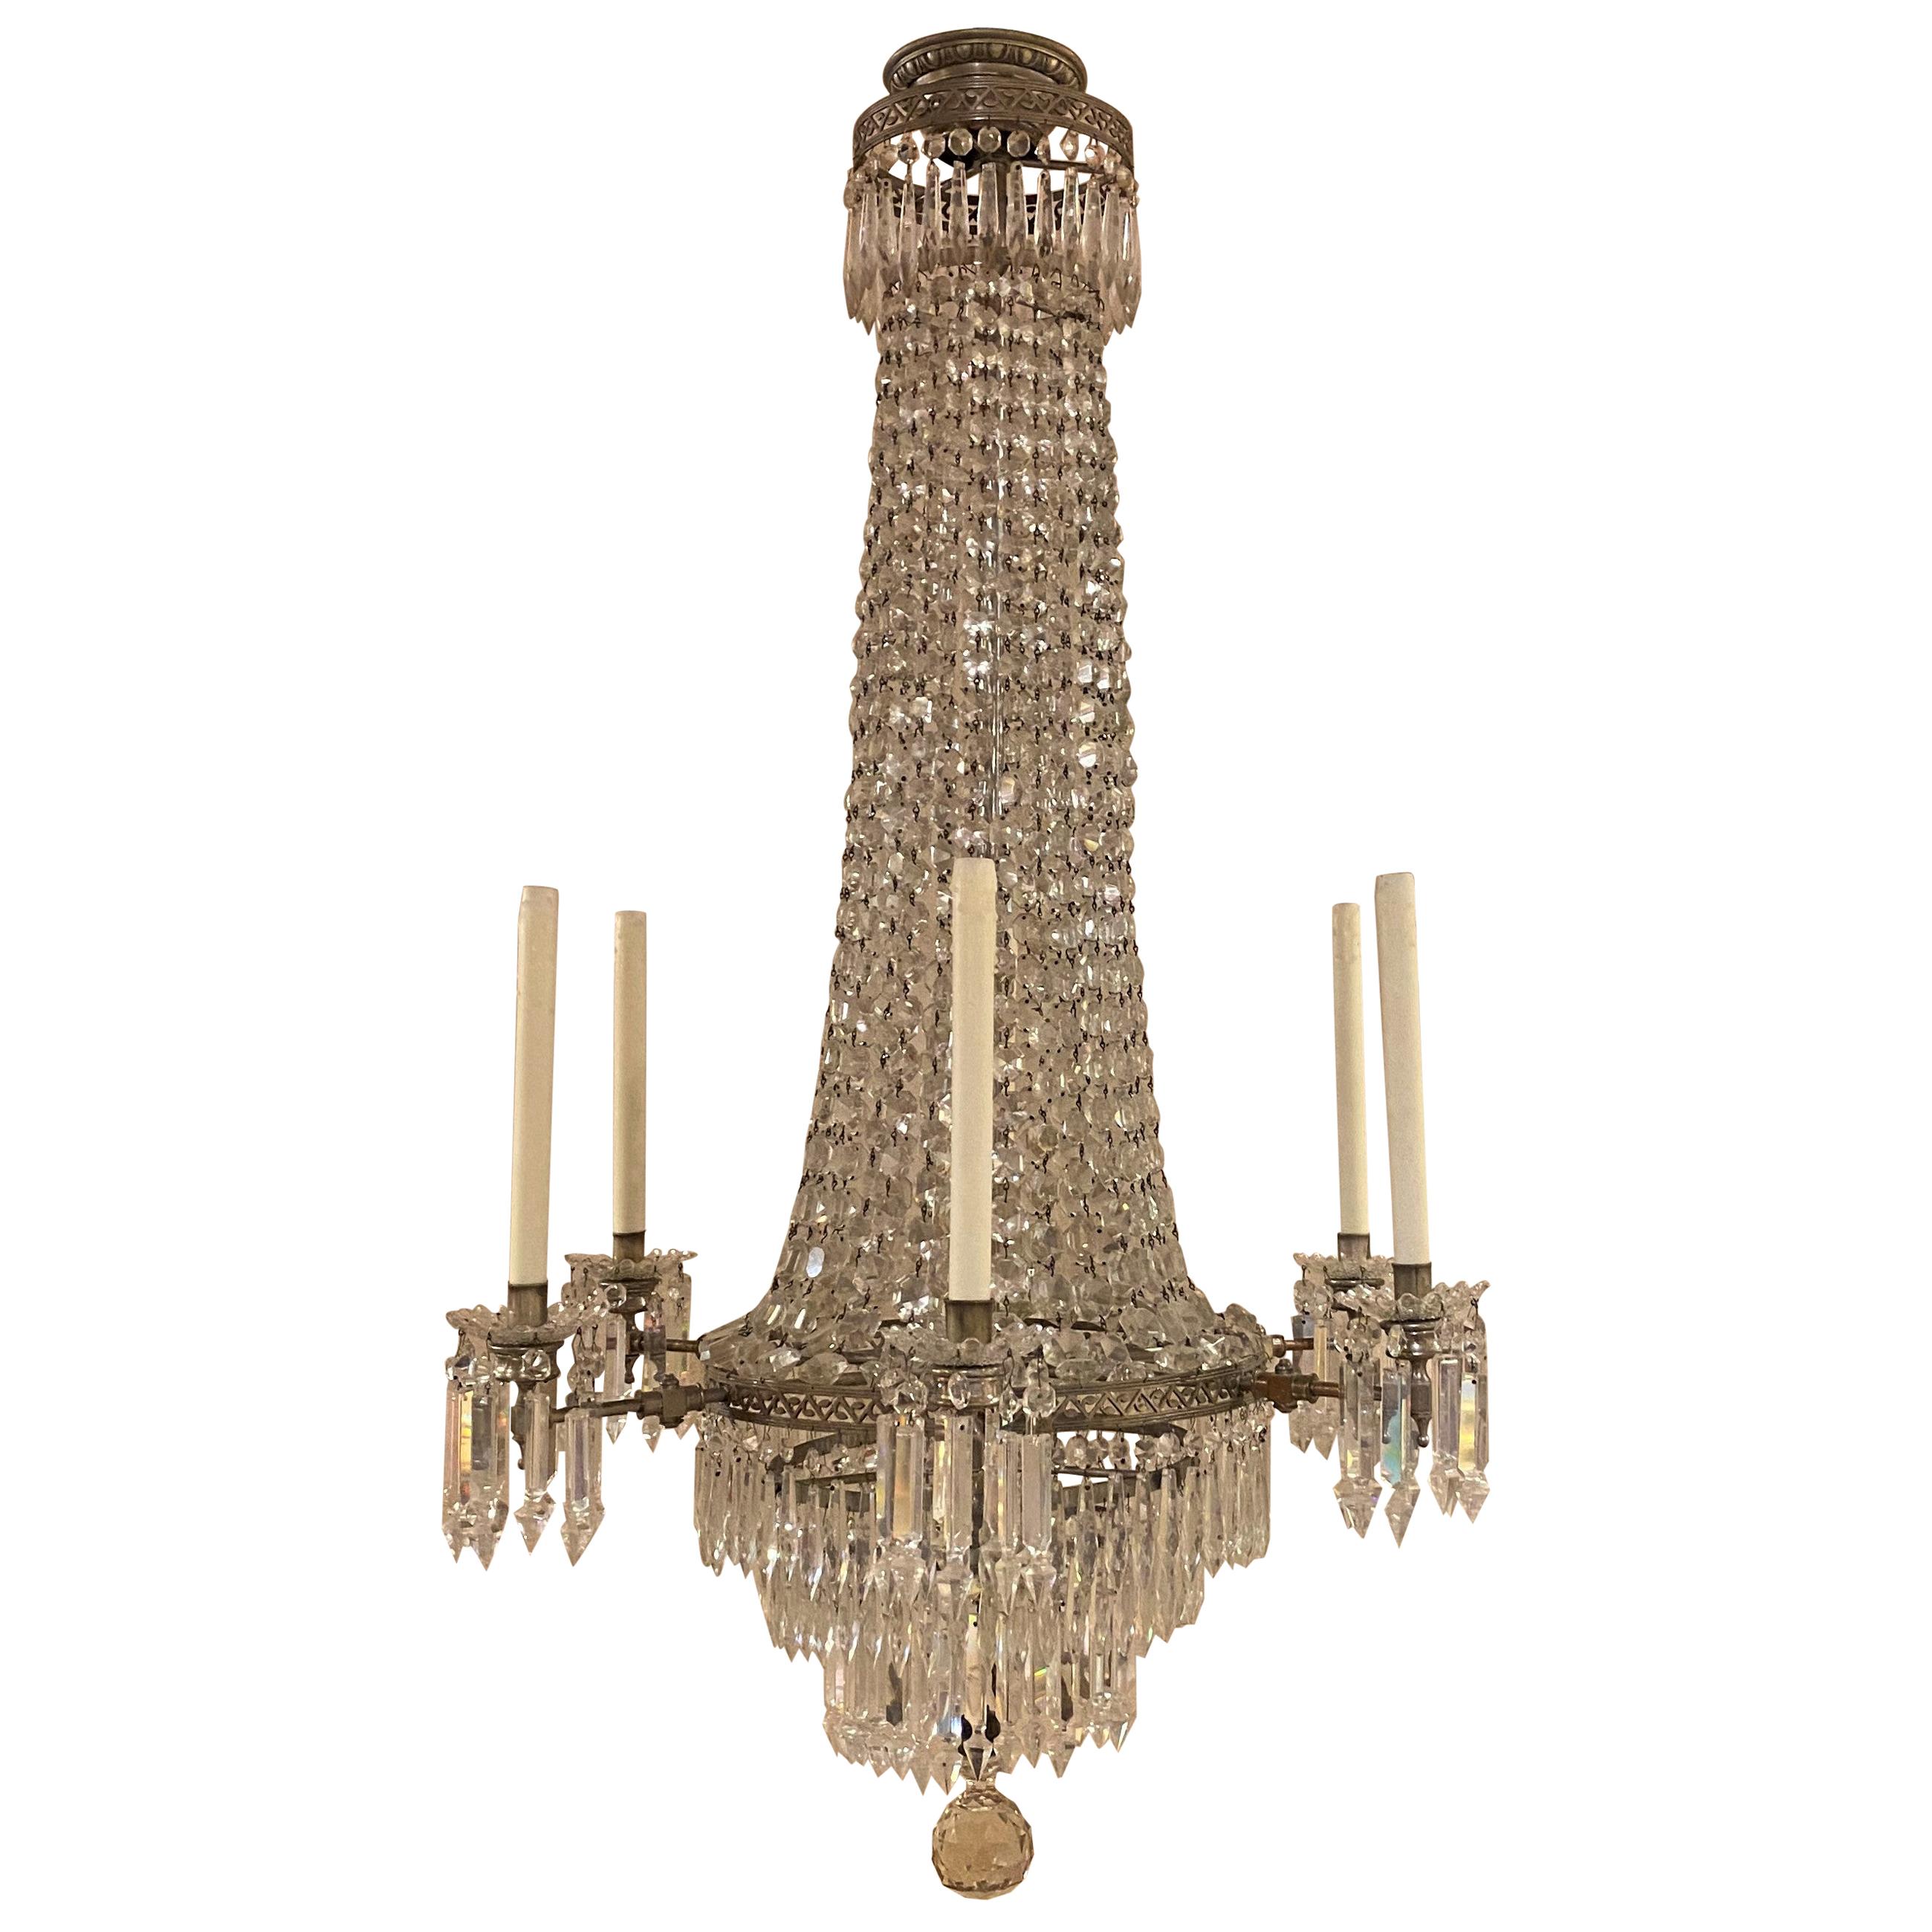 Exceptional Early 20th Century American Crystal Six Light Gasolier or Chandelier